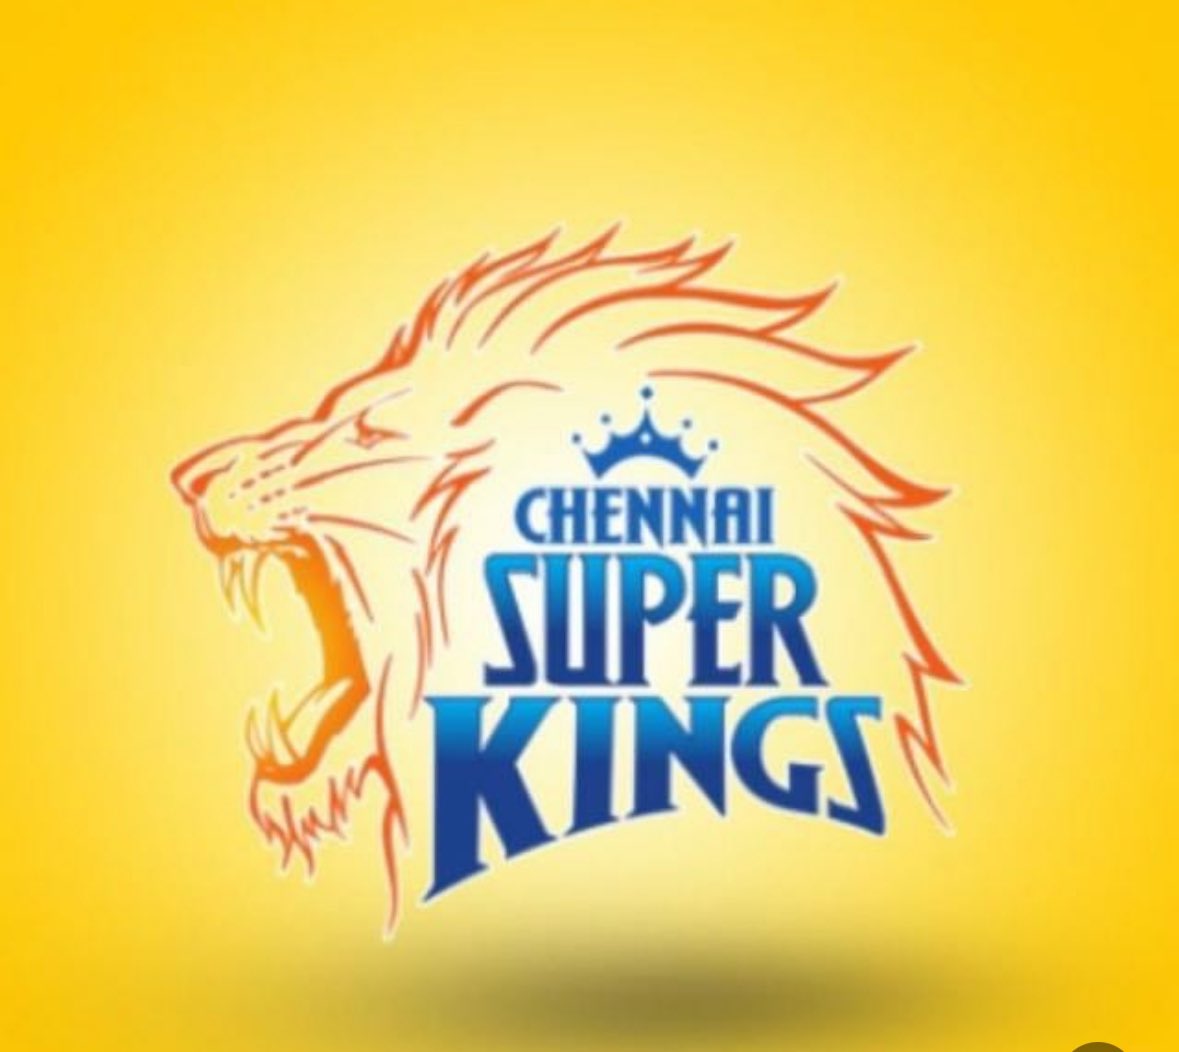 Let’s send the boys lots of yellow love, if you love this team @ChennaiIPL #seasonopener